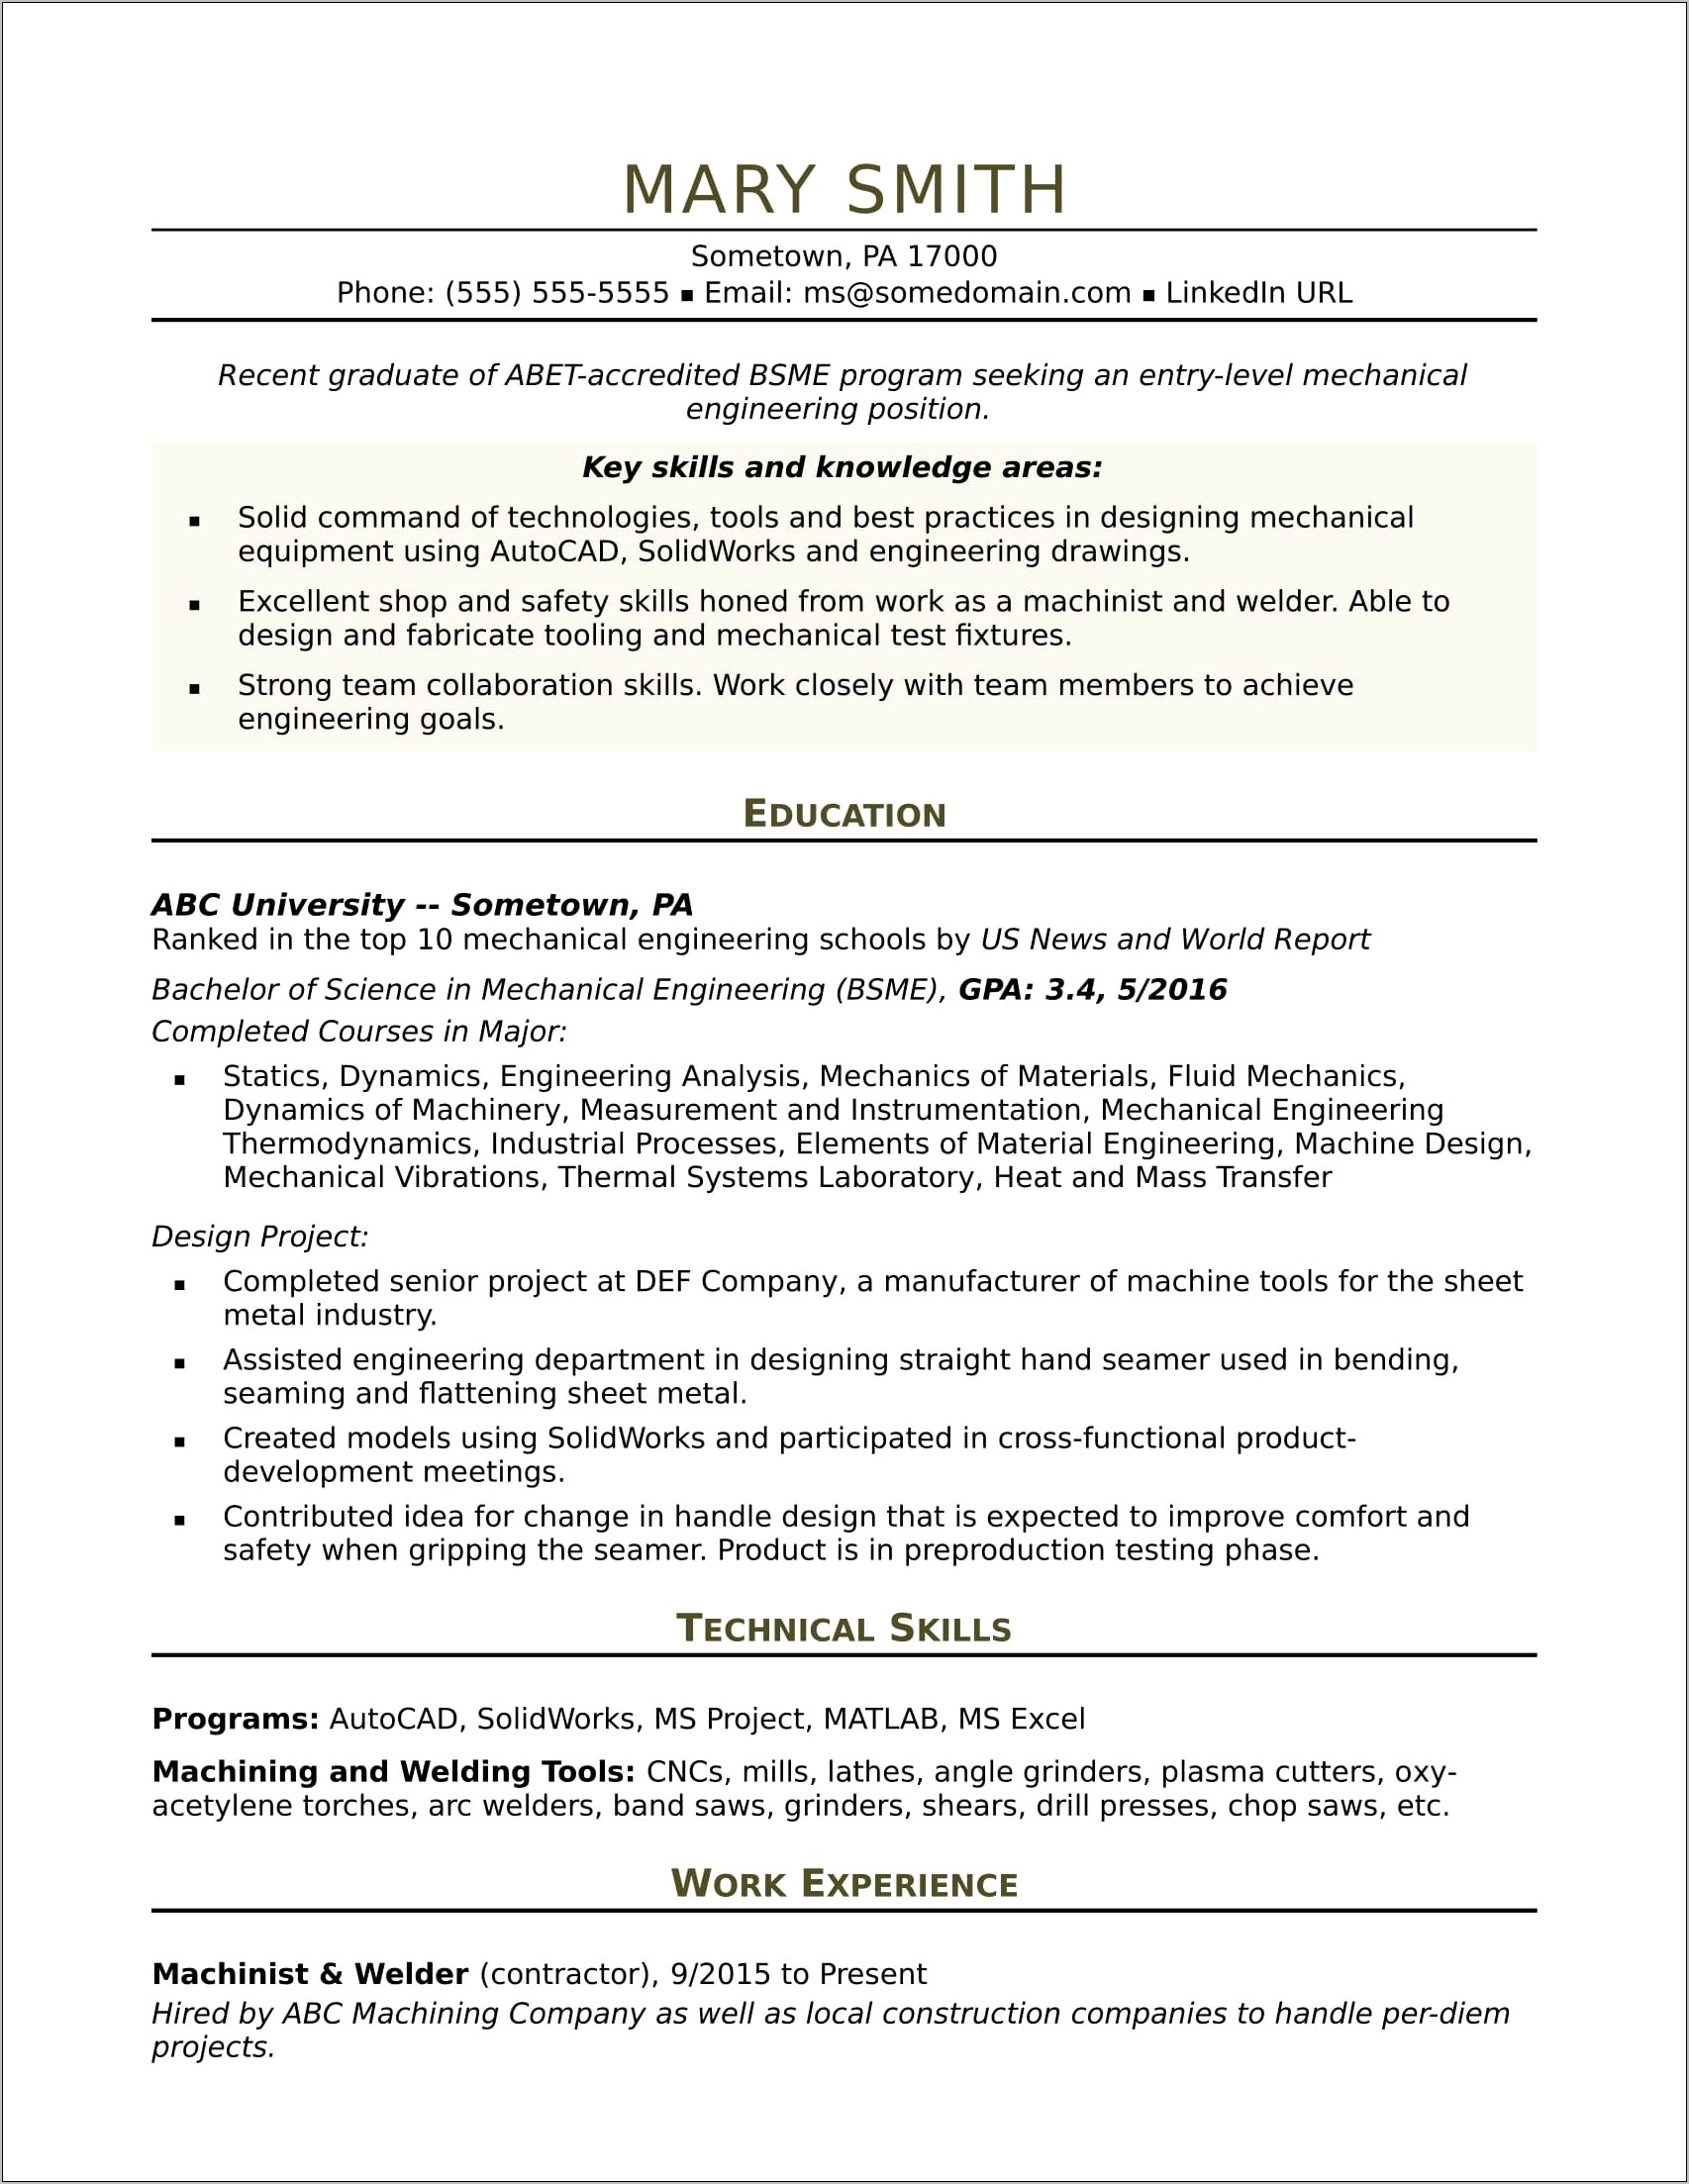 A Good Professional Resume For Recent Grads